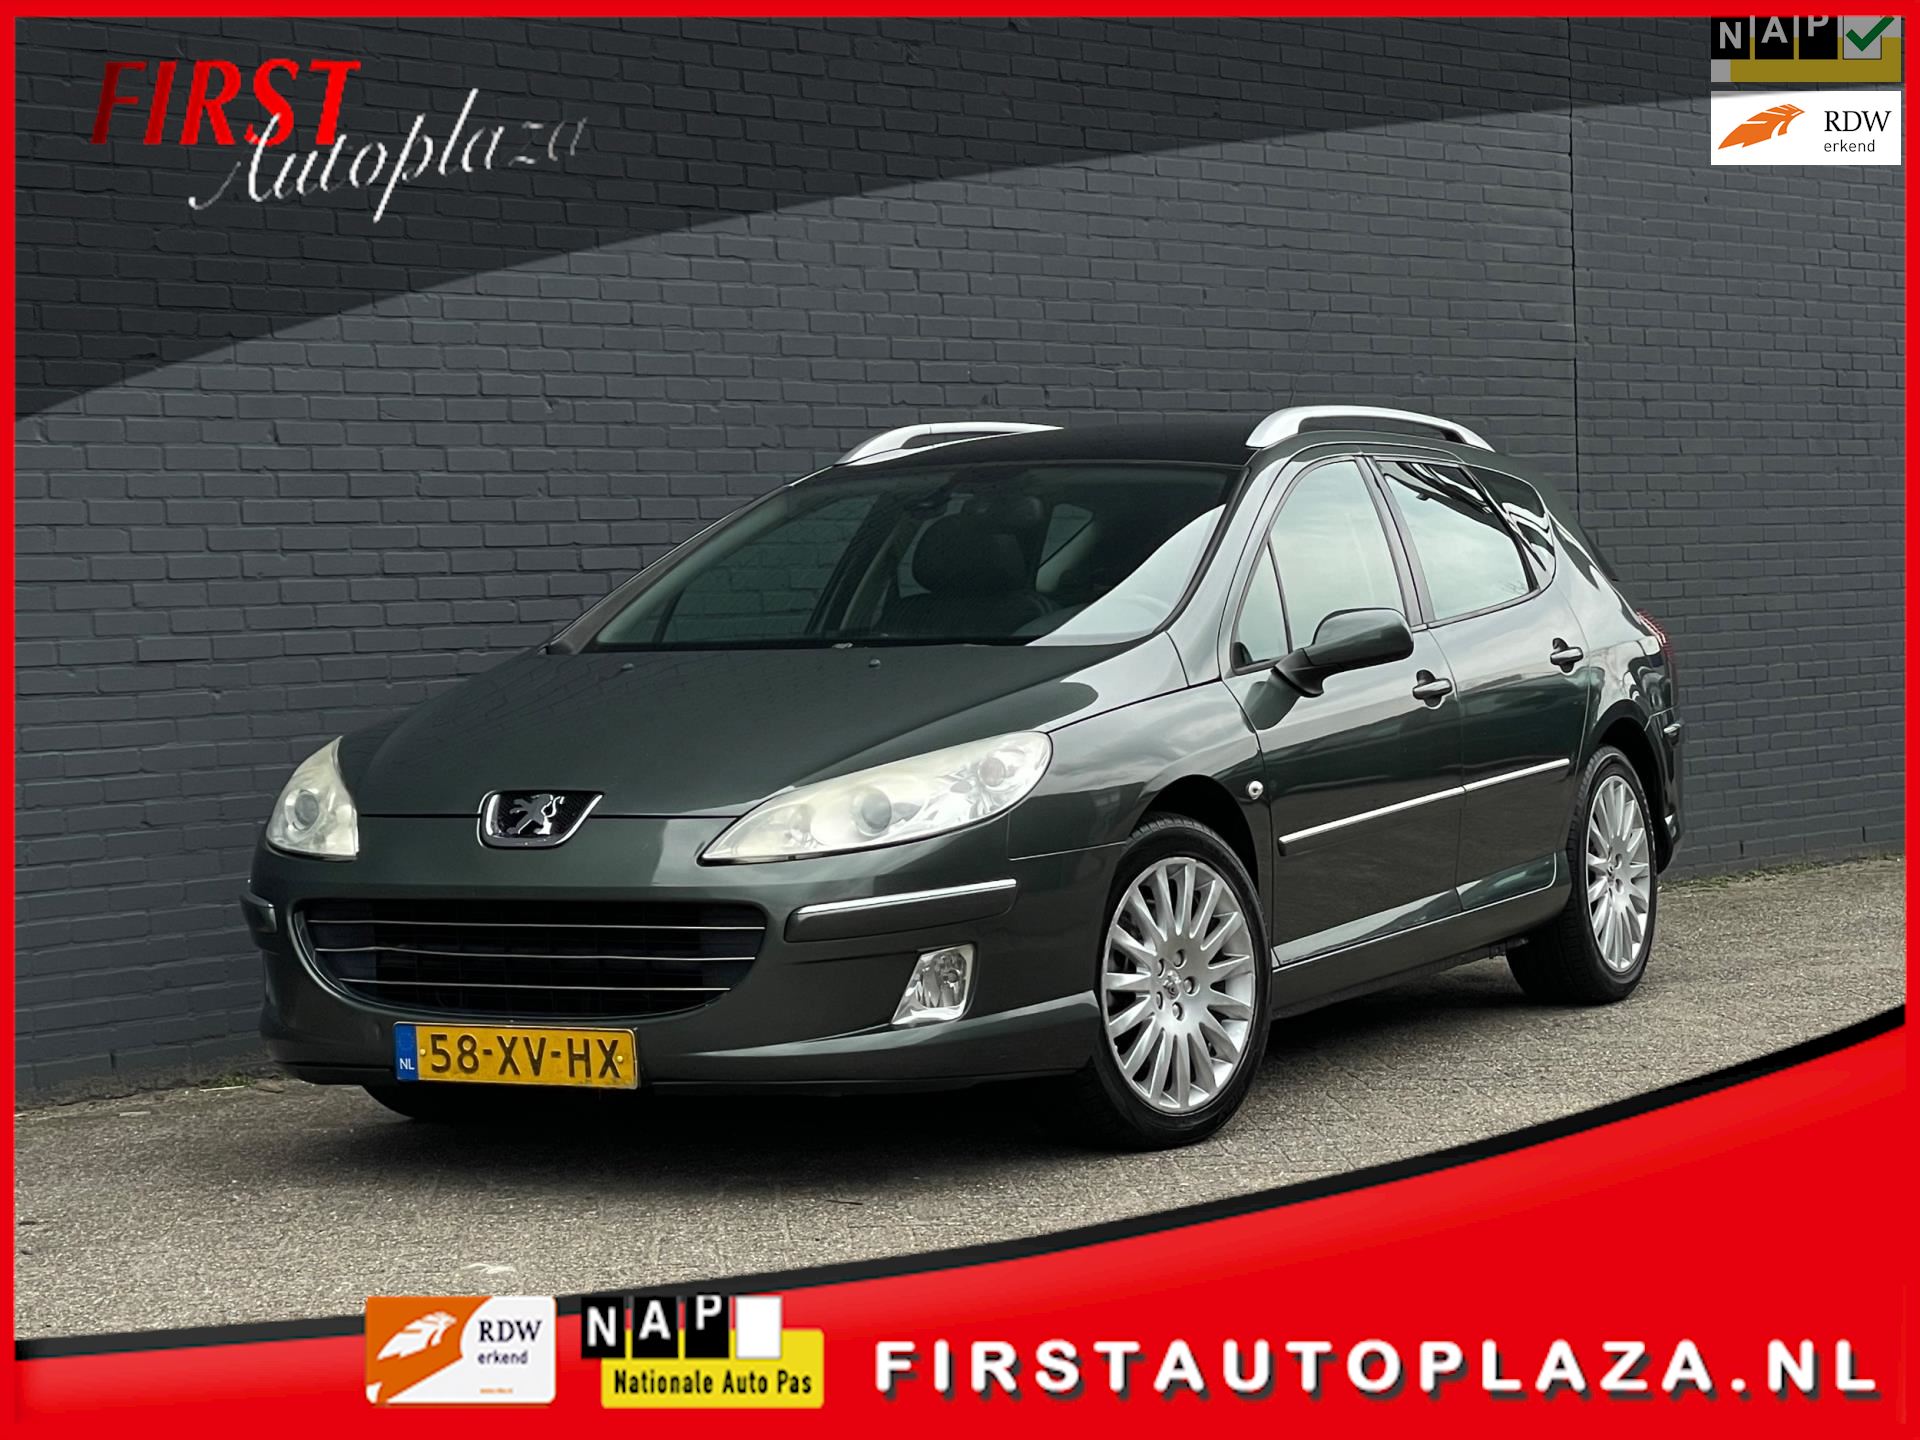 Peugeot 407 SW occasion - FIRST Autoplaza B.V.